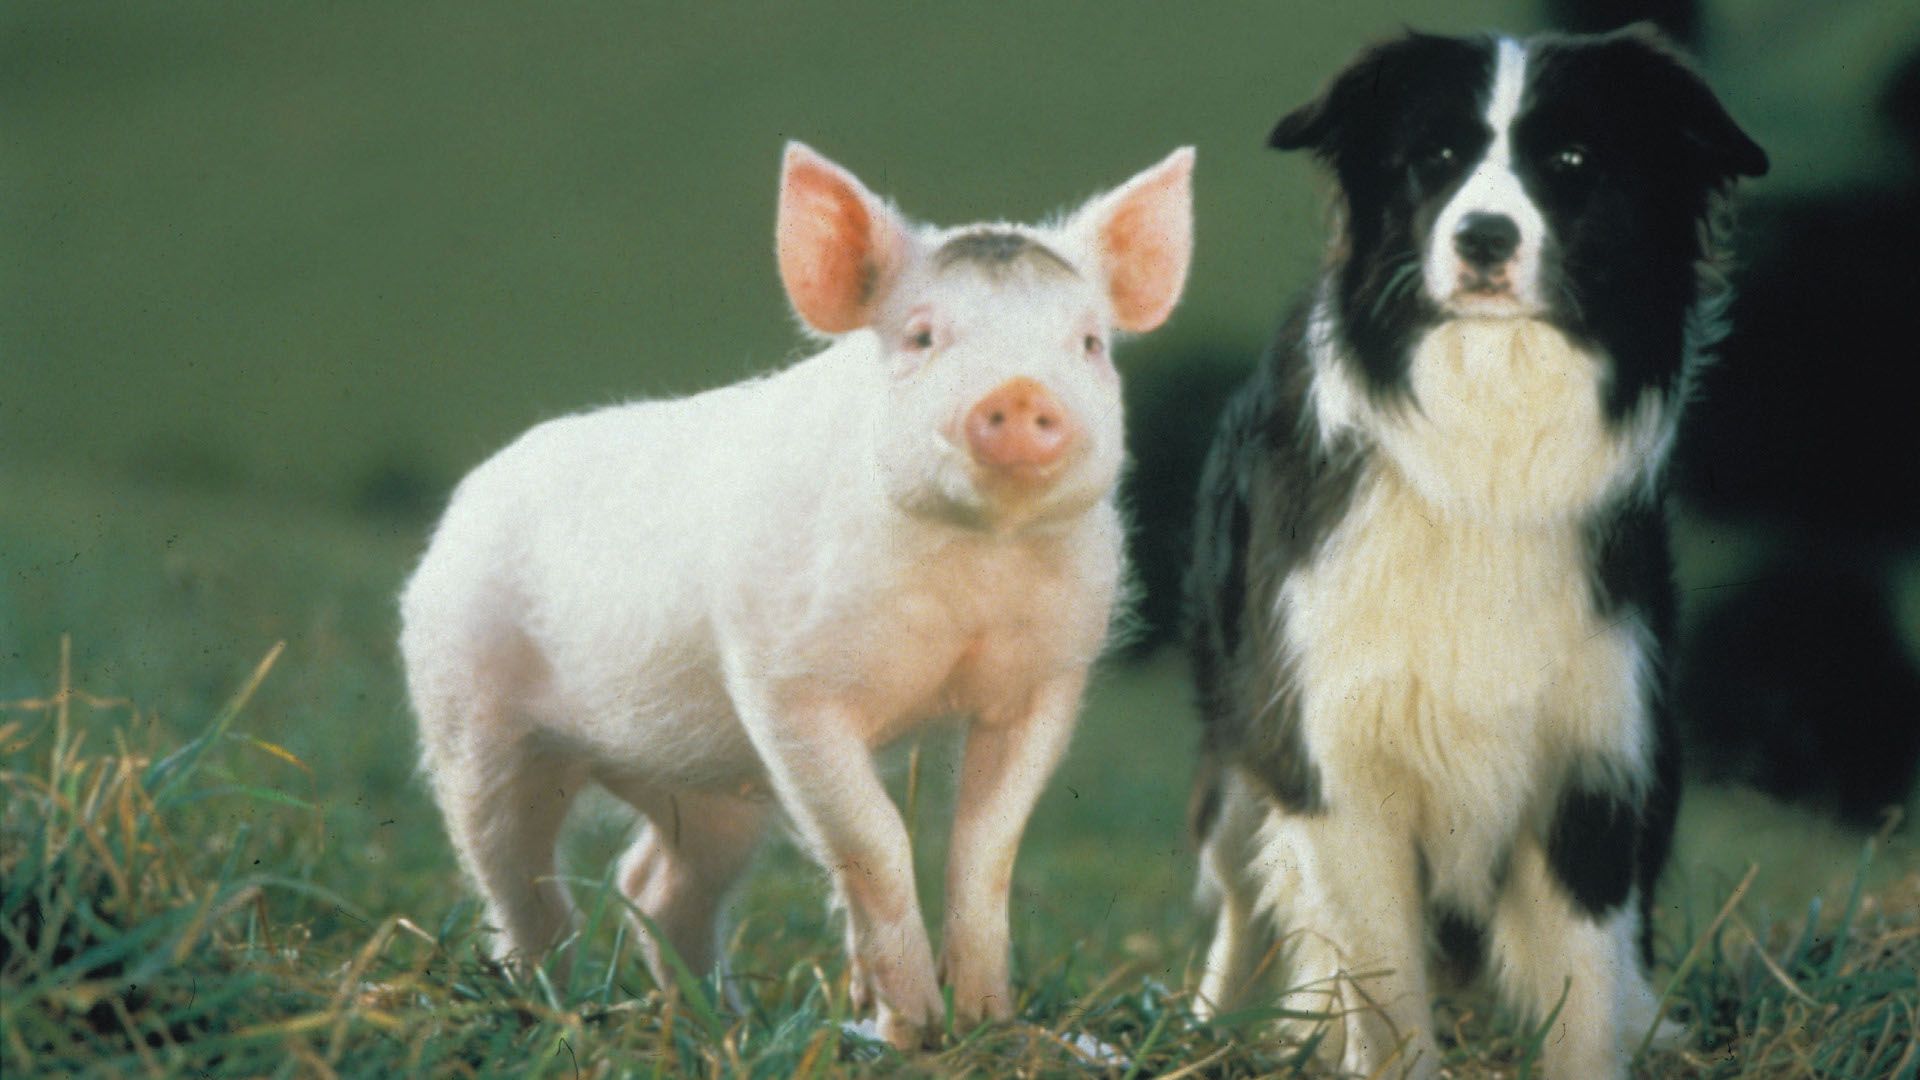 <p>                     Babe is a piglet won at a country fair and raised by sheepdogs in an English farm, who learns how to herd sheep with a little help from Farmer Hoggett. He bonds with Border Collie Fly and has to cope with Fly’s mate Rex’s jealousy, as where does a sheep-herding pig fit into the farm’s established hierarchy? Charming family classic adapted from Dick King-Smith’s children’s novel <em>The Sheep-Pig</em>.                   </p>